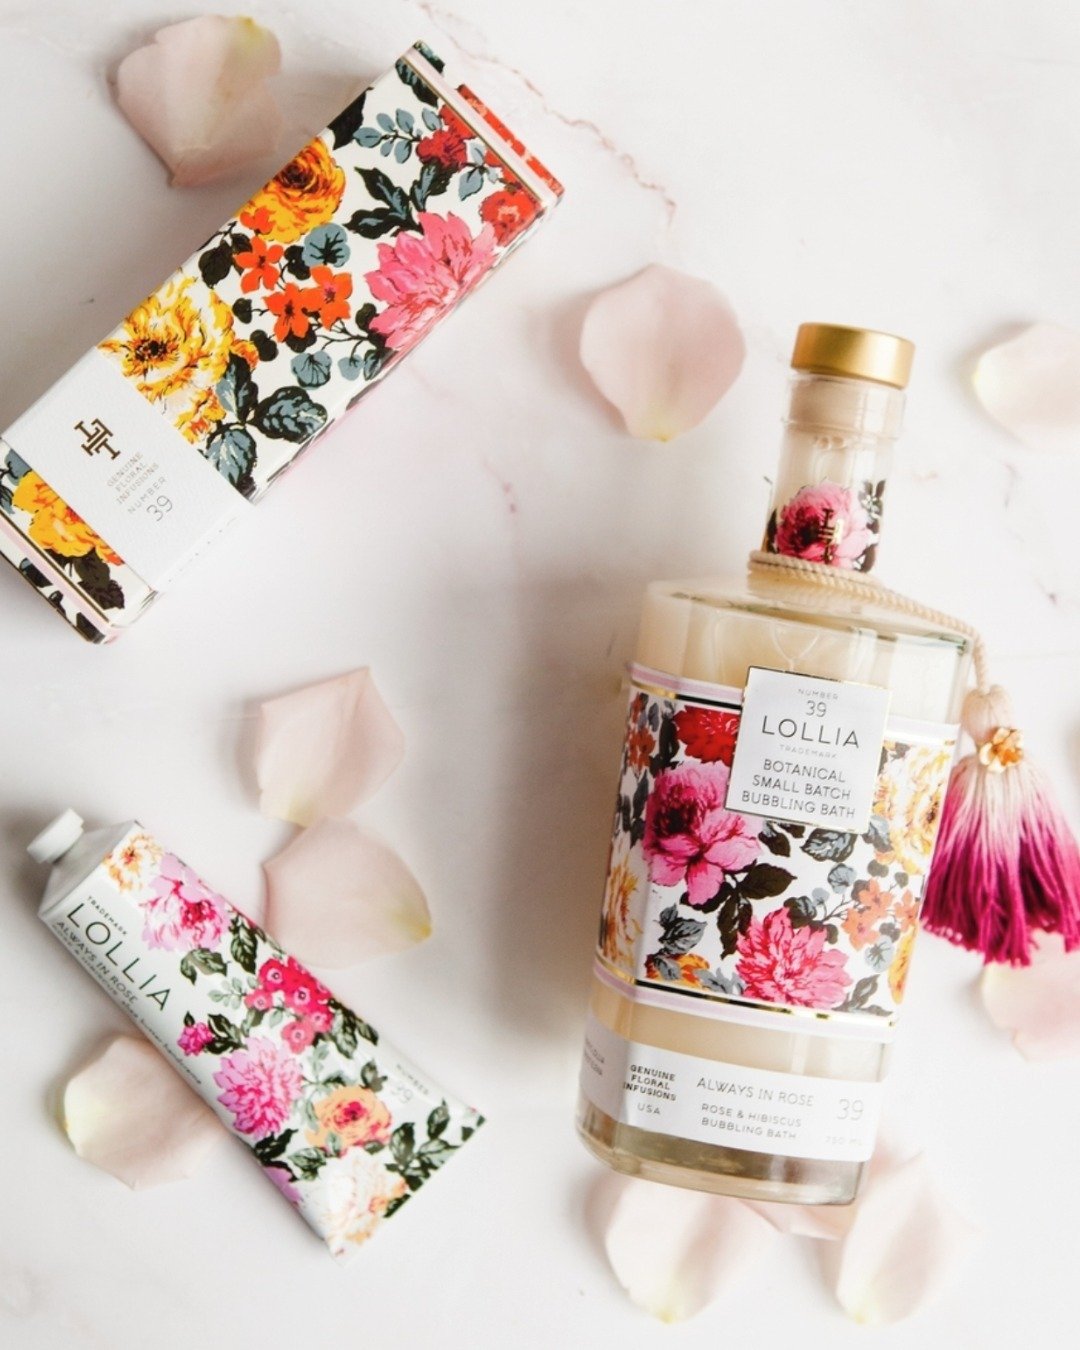 Pamper Mom this Mother's Day with @lollia_life💝 From silky handcremes to dreamy bubble baths, @lollia has everything she needs to relax and unwind. And as a special treat, enjoy a free handcreme key with any Lollia handcreme purchase! 🎁✨